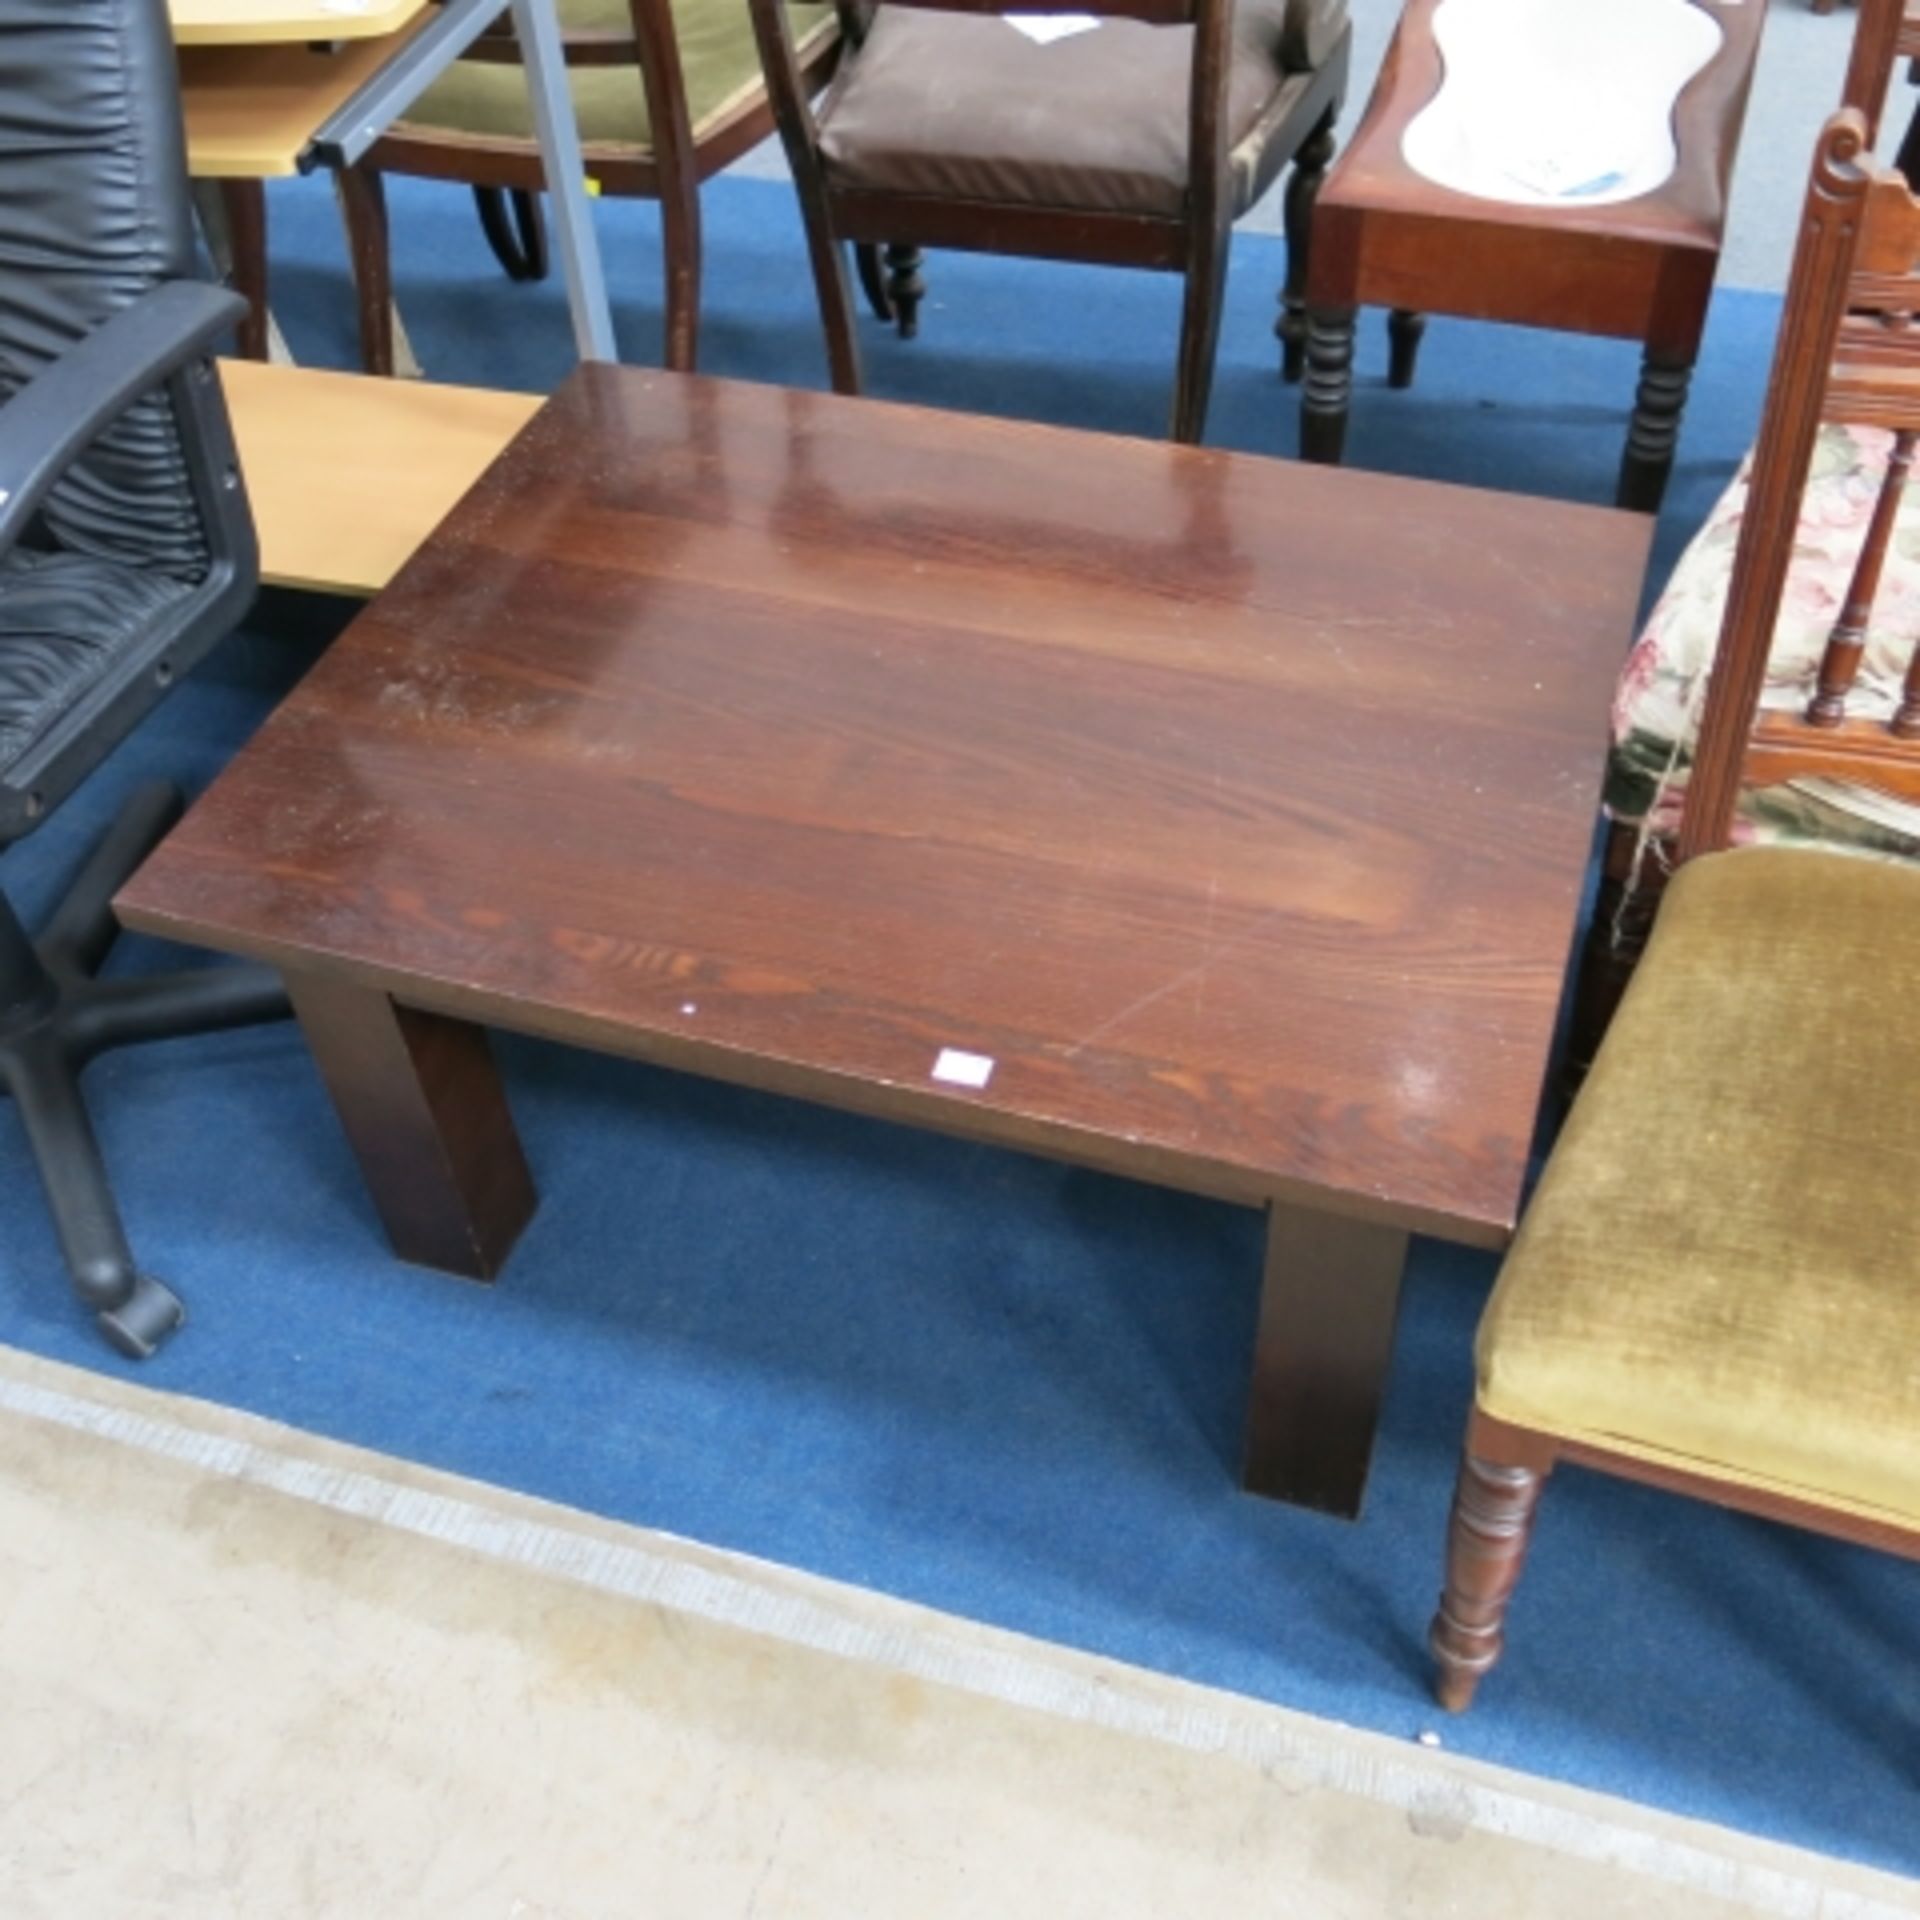 A stained wooden coffee table on square legs, W 90cm, D 70cm, H 45cm (est. £10-£20)